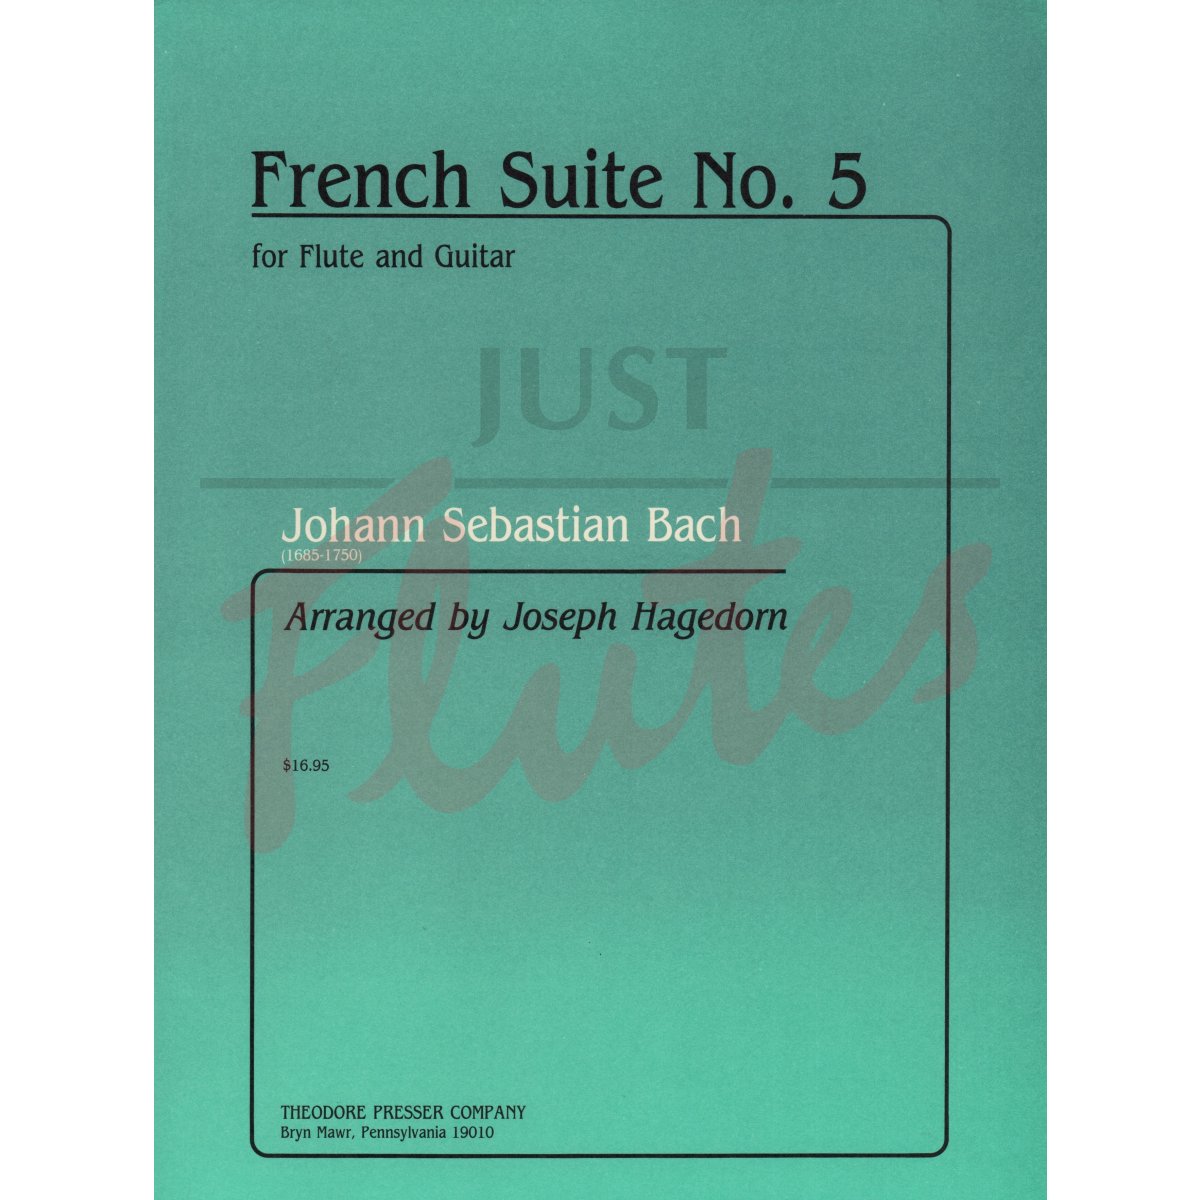 French Suite No 5 for Flute and Guitar